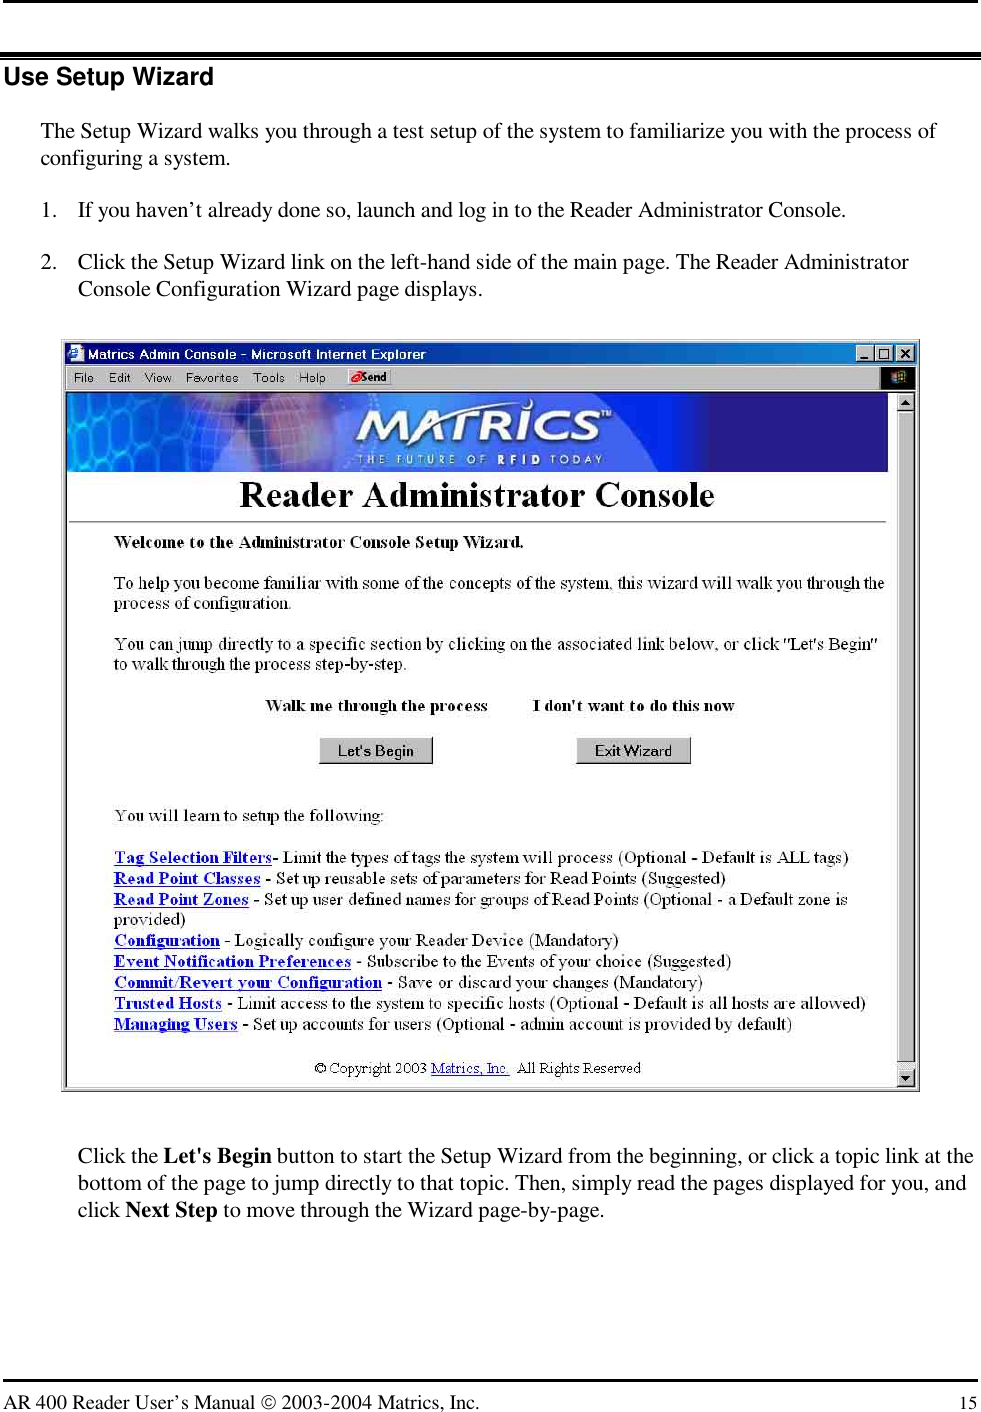   AR 400 Reader User’s Manual  2003-2004 Matrics, Inc.  15 Use Setup Wizard The Setup Wizard walks you through a test setup of the system to familiarize you with the process of configuring a system. 1.  If you haven’t already done so, launch and log in to the Reader Administrator Console. 2.  Click the Setup Wizard link on the left-hand side of the main page. The Reader Administrator Console Configuration Wizard page displays.  Click the Let&apos;s Begin button to start the Setup Wizard from the beginning, or click a topic link at the bottom of the page to jump directly to that topic. Then, simply read the pages displayed for you, and click Next Step to move through the Wizard page-by-page. 